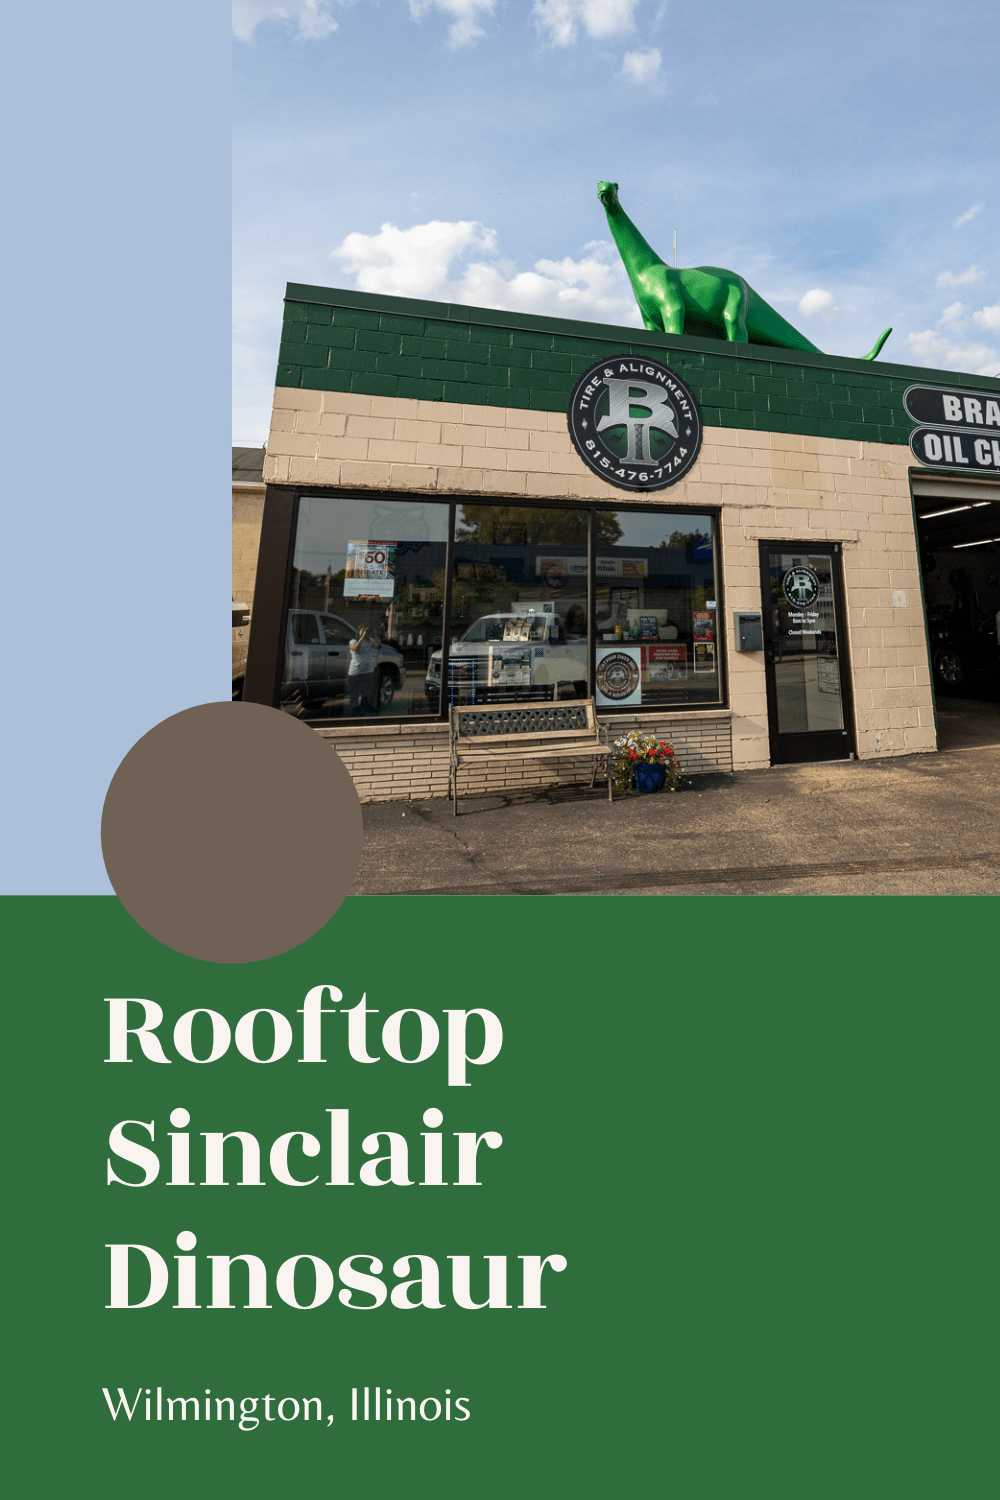 Traveling Route 66 or taking an Illinois road trip? You'll want to go the way of the dinosaur and visit this fun stop: the Rooftop Sinclair Dinosaur in Wilmington, Illinois. Be sure to visit this Illinois roadside attraction on your summer road trip.  #Route66 #Route66RoadTrip #Illinois #Illinois RoadTrip #RoadTrip #RoadsideAttraction #RoadsideAttractions #Illinois RoadsideAttraction